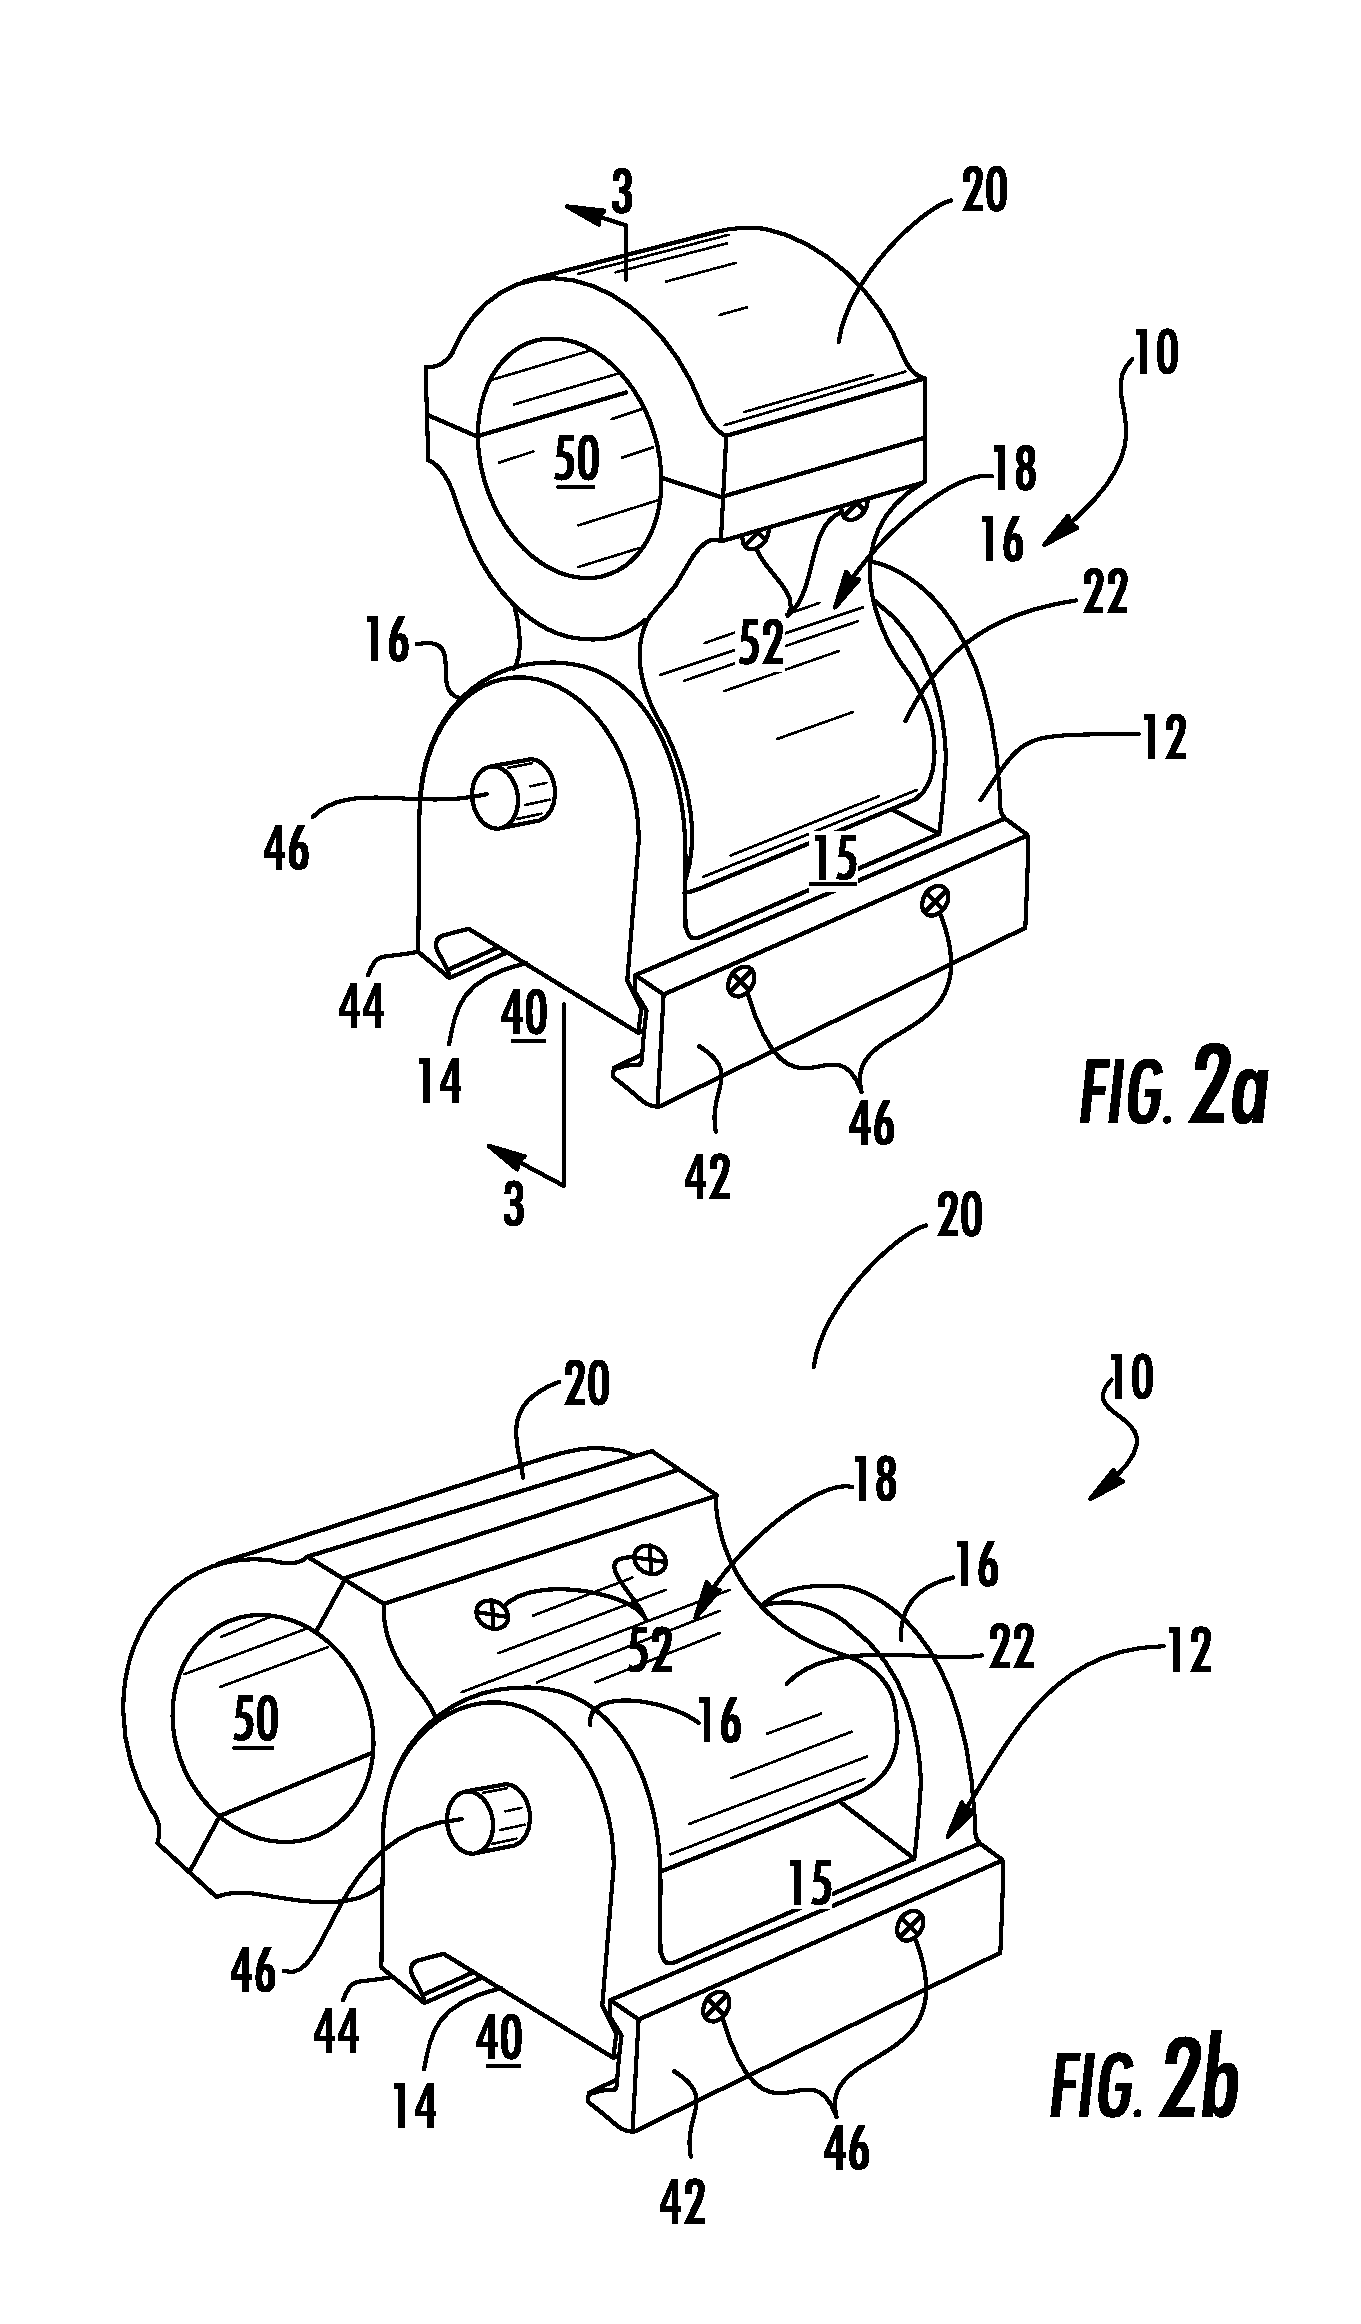 Pivoting mount for a firearm accessory